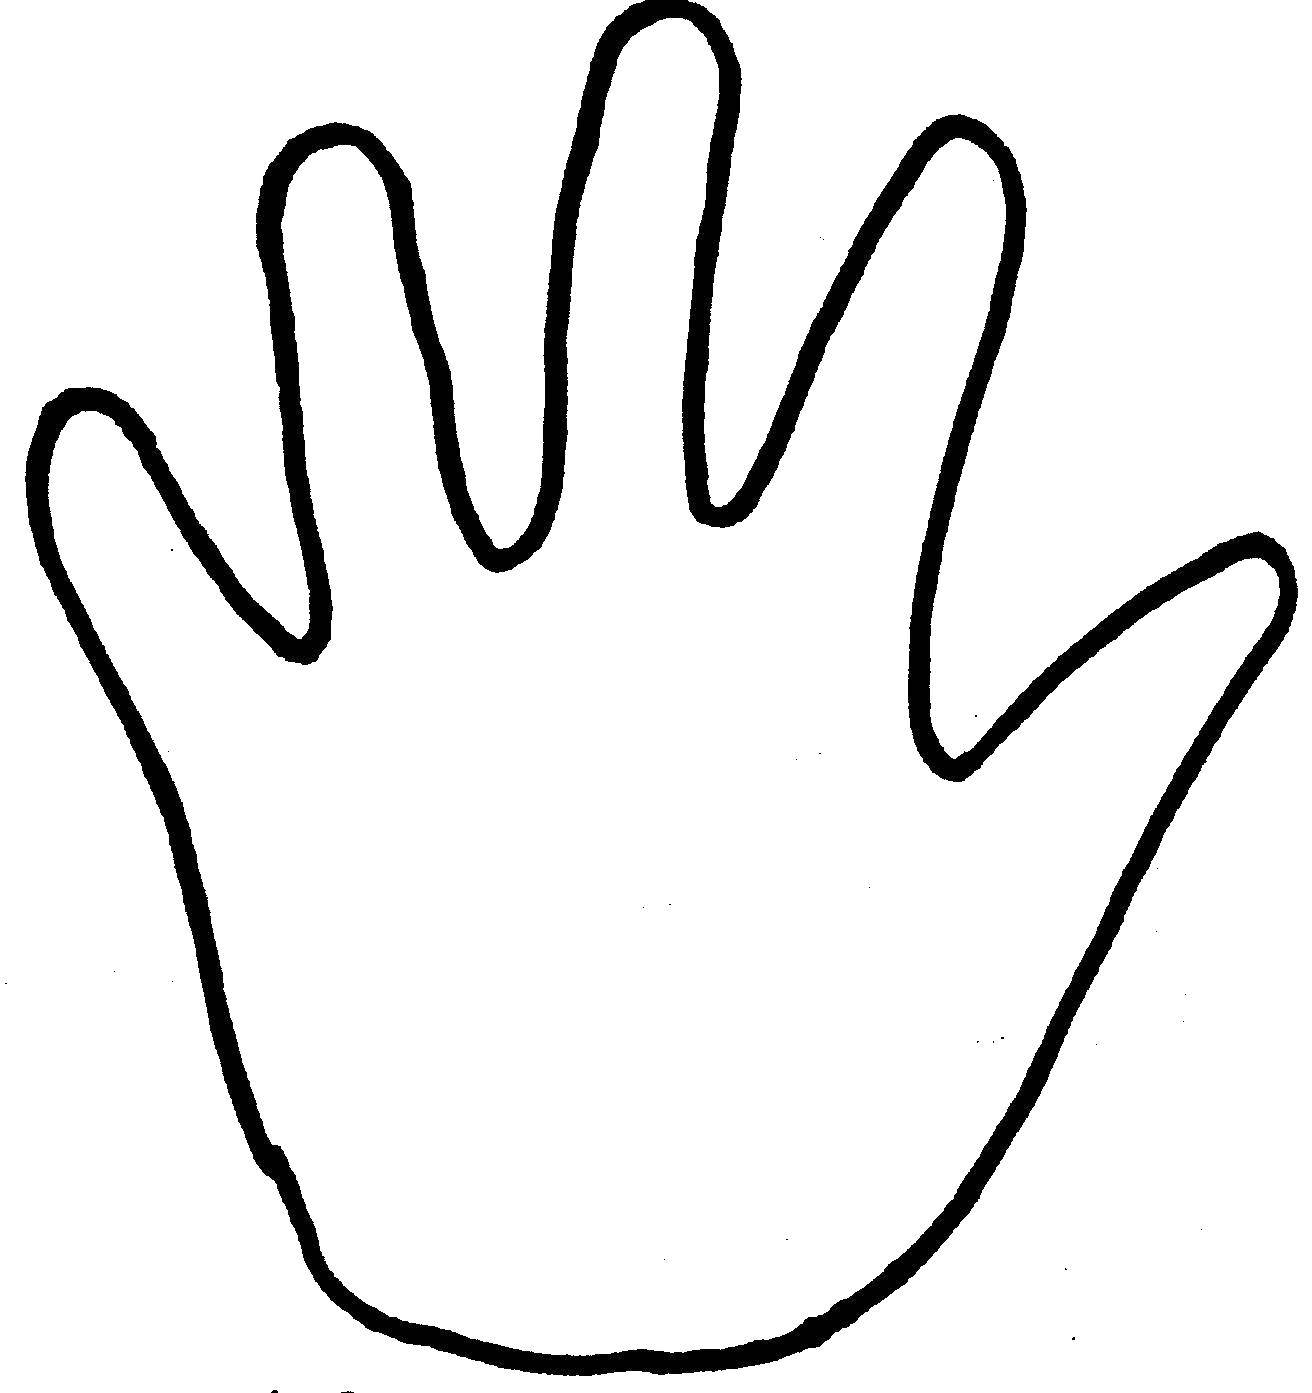 Coloring Hand. Category hand. Tags:  hand, palm, palms.